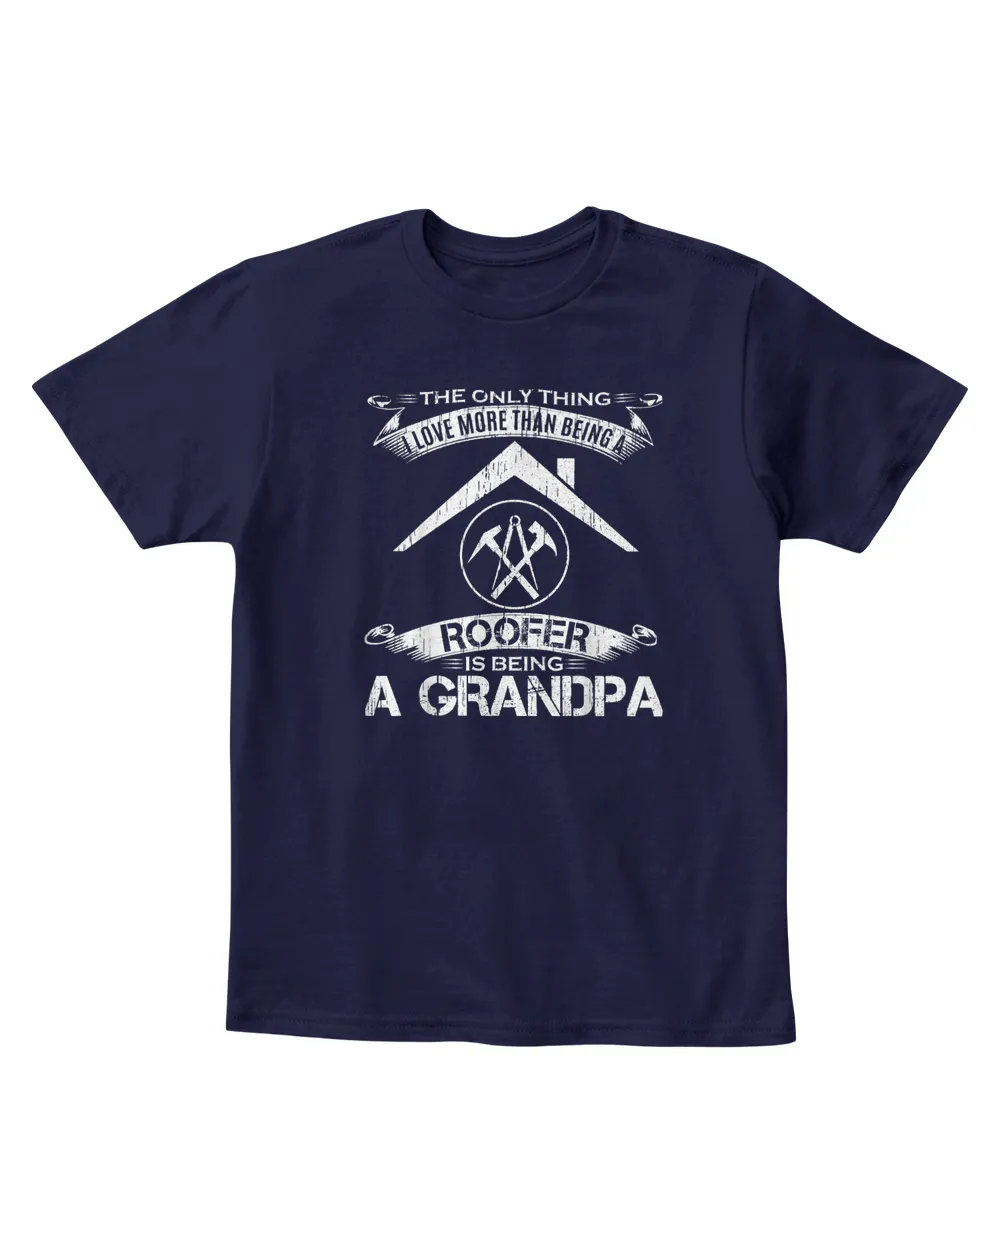 Vintage I Love More Than Being A Roofer Is Being Grandpa Tee T-Shirt